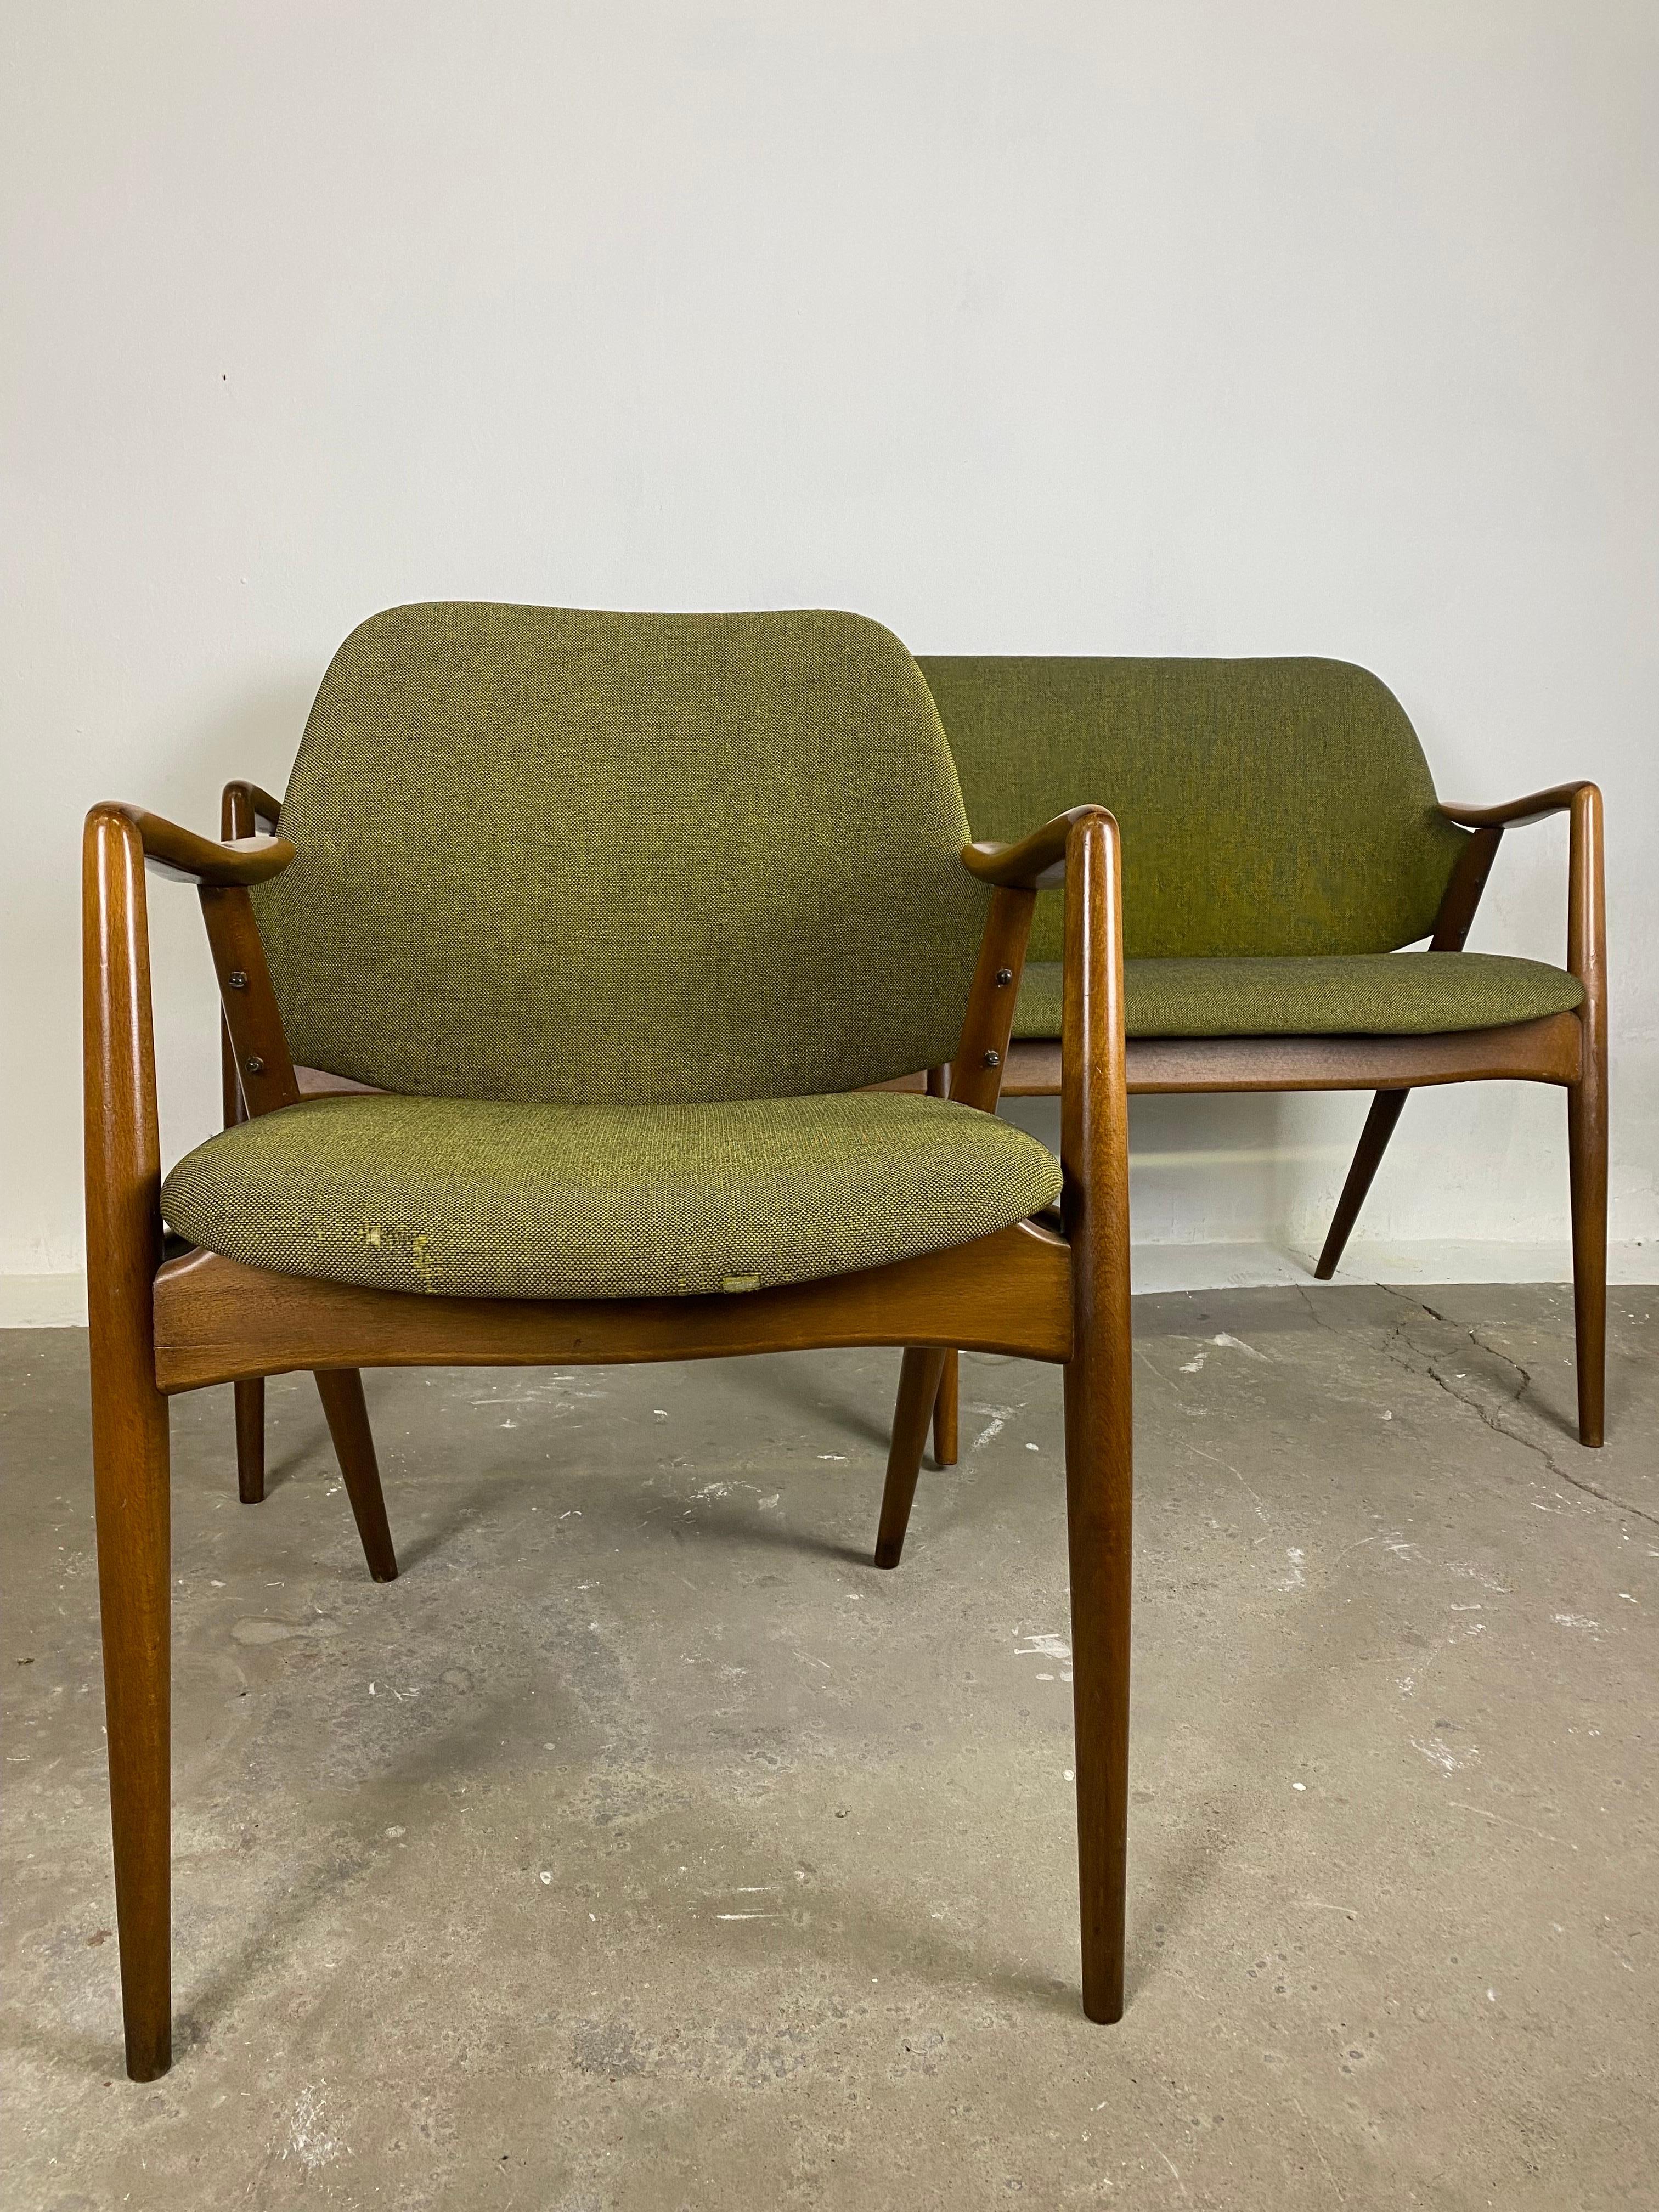 Midcentury Kontur Set of 2  Chairs by Alf Svensson for Dux Sweden 1950s In Fair Condition For Sale In Halle, DE